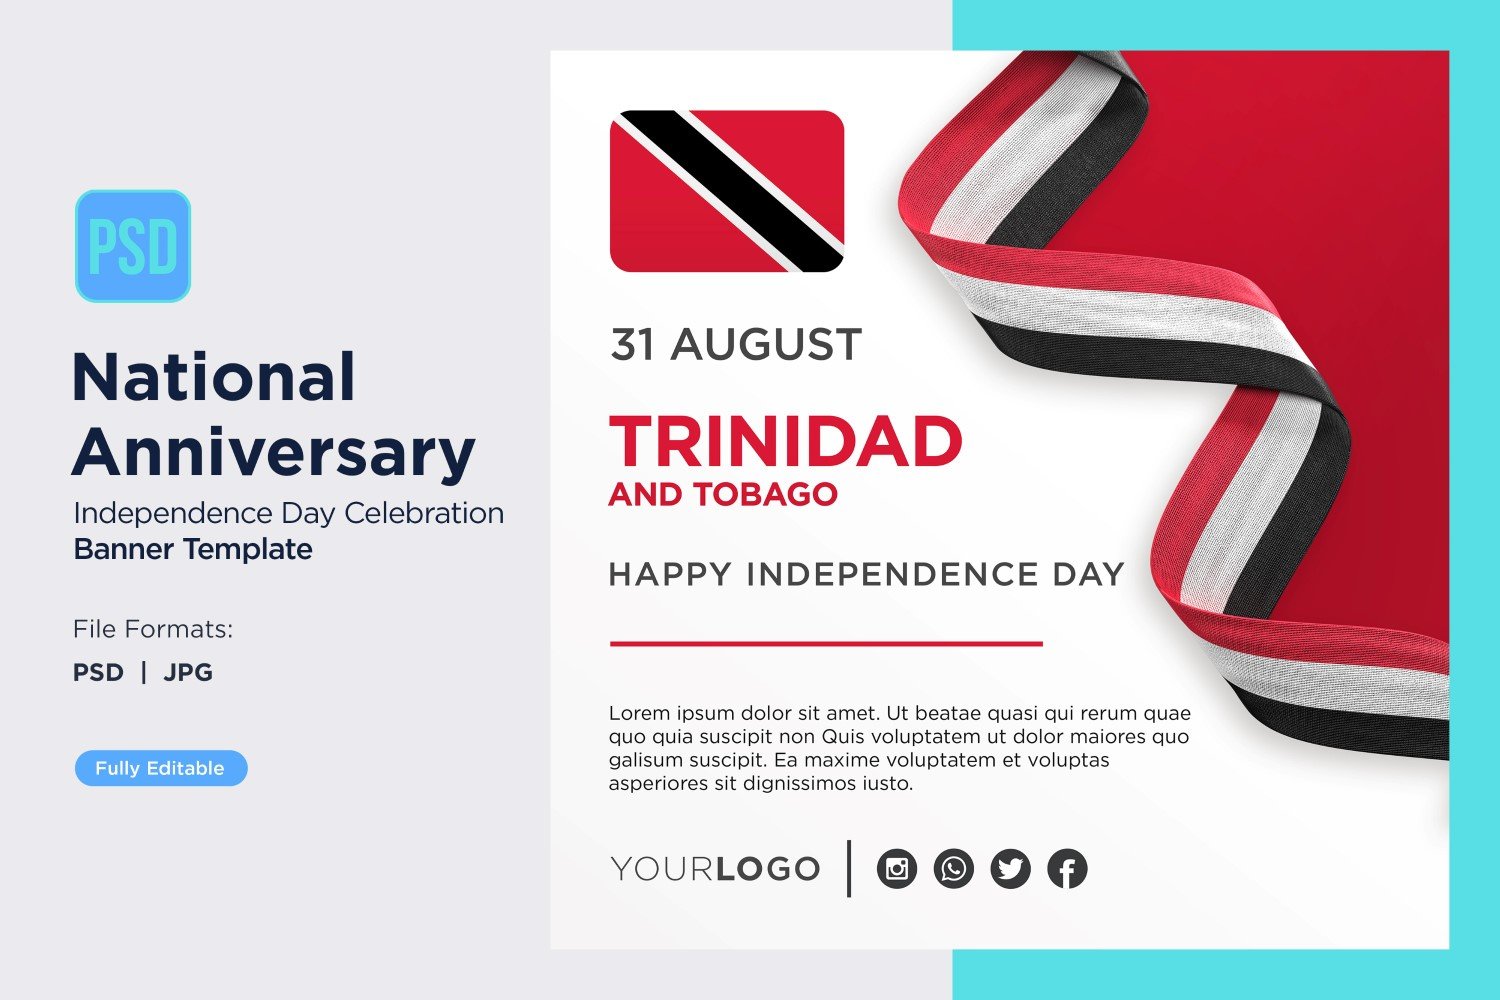 Template #402973 Day Celebration Webdesign Template - Logo template Preview